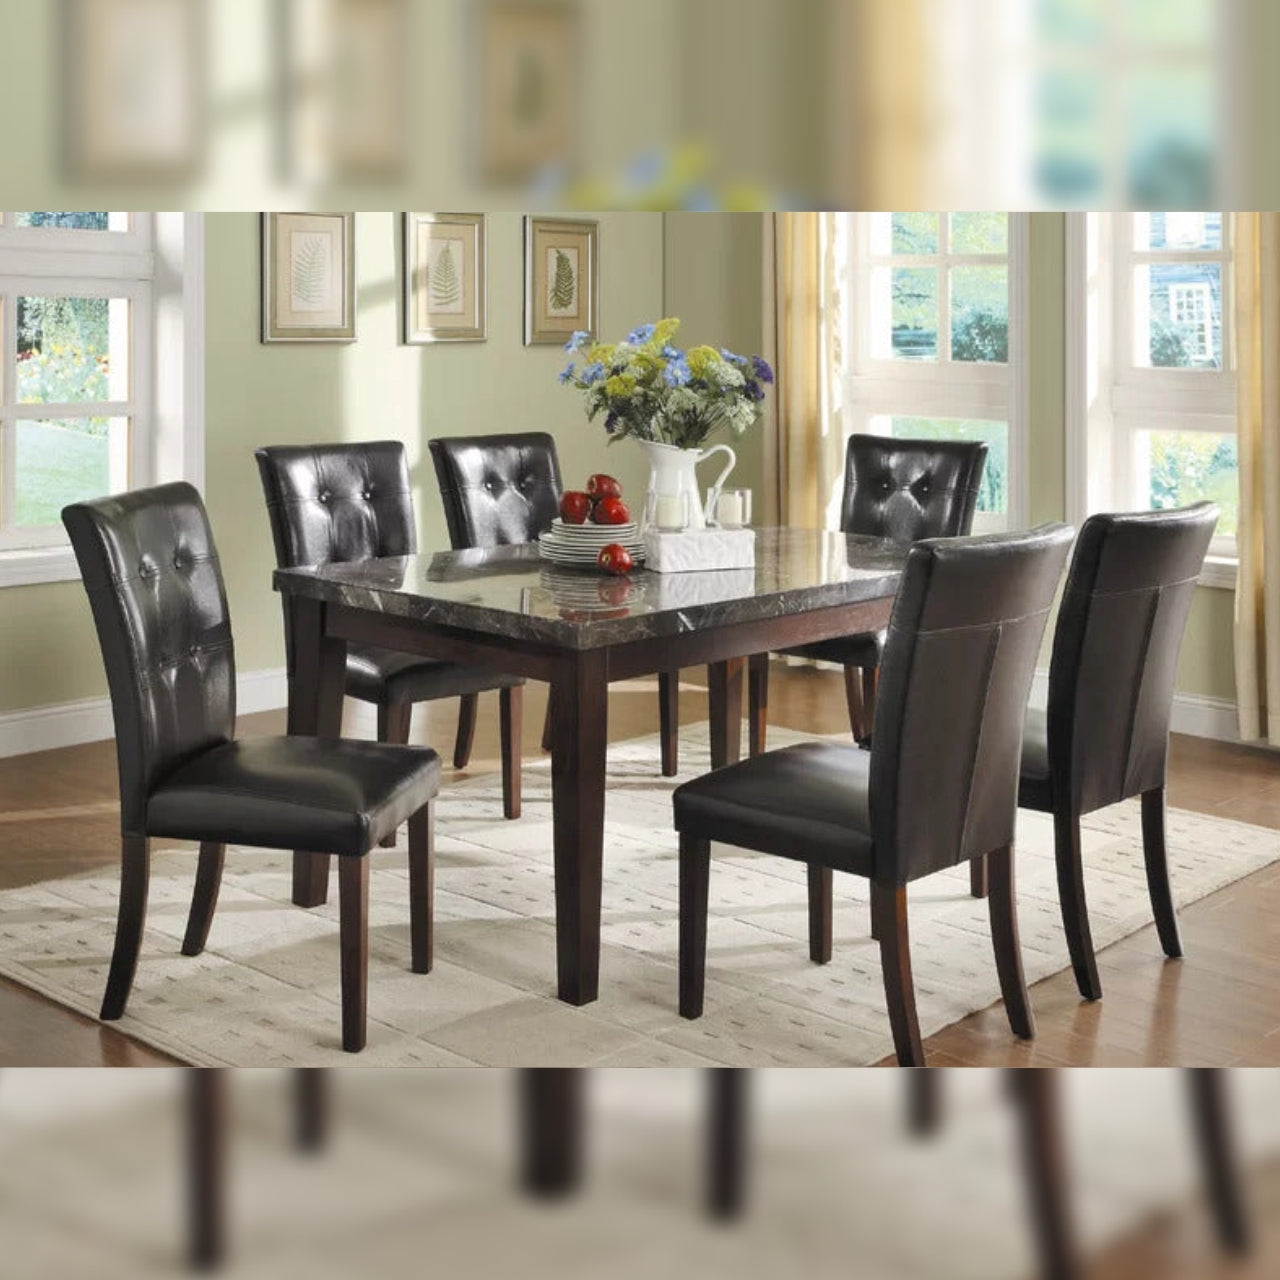 Dining Set Dining Table with 6 Chairs Bar Height Dining Set